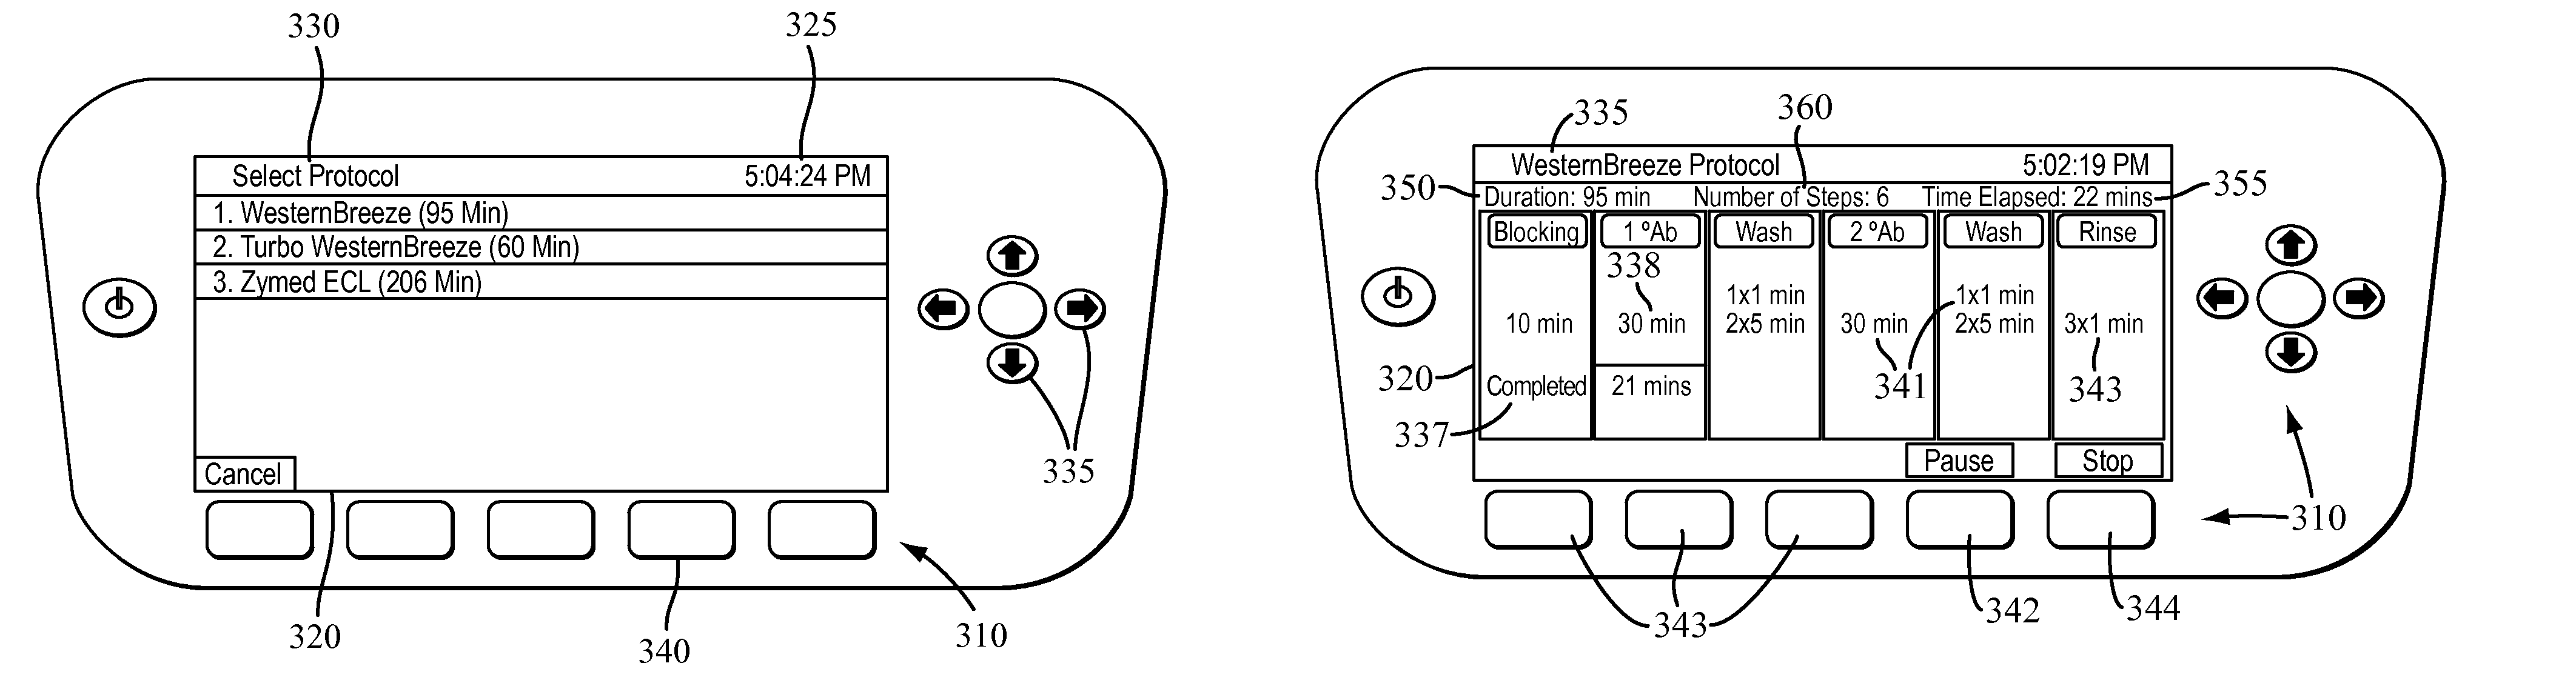 Apparatus for and method of processing biological samples